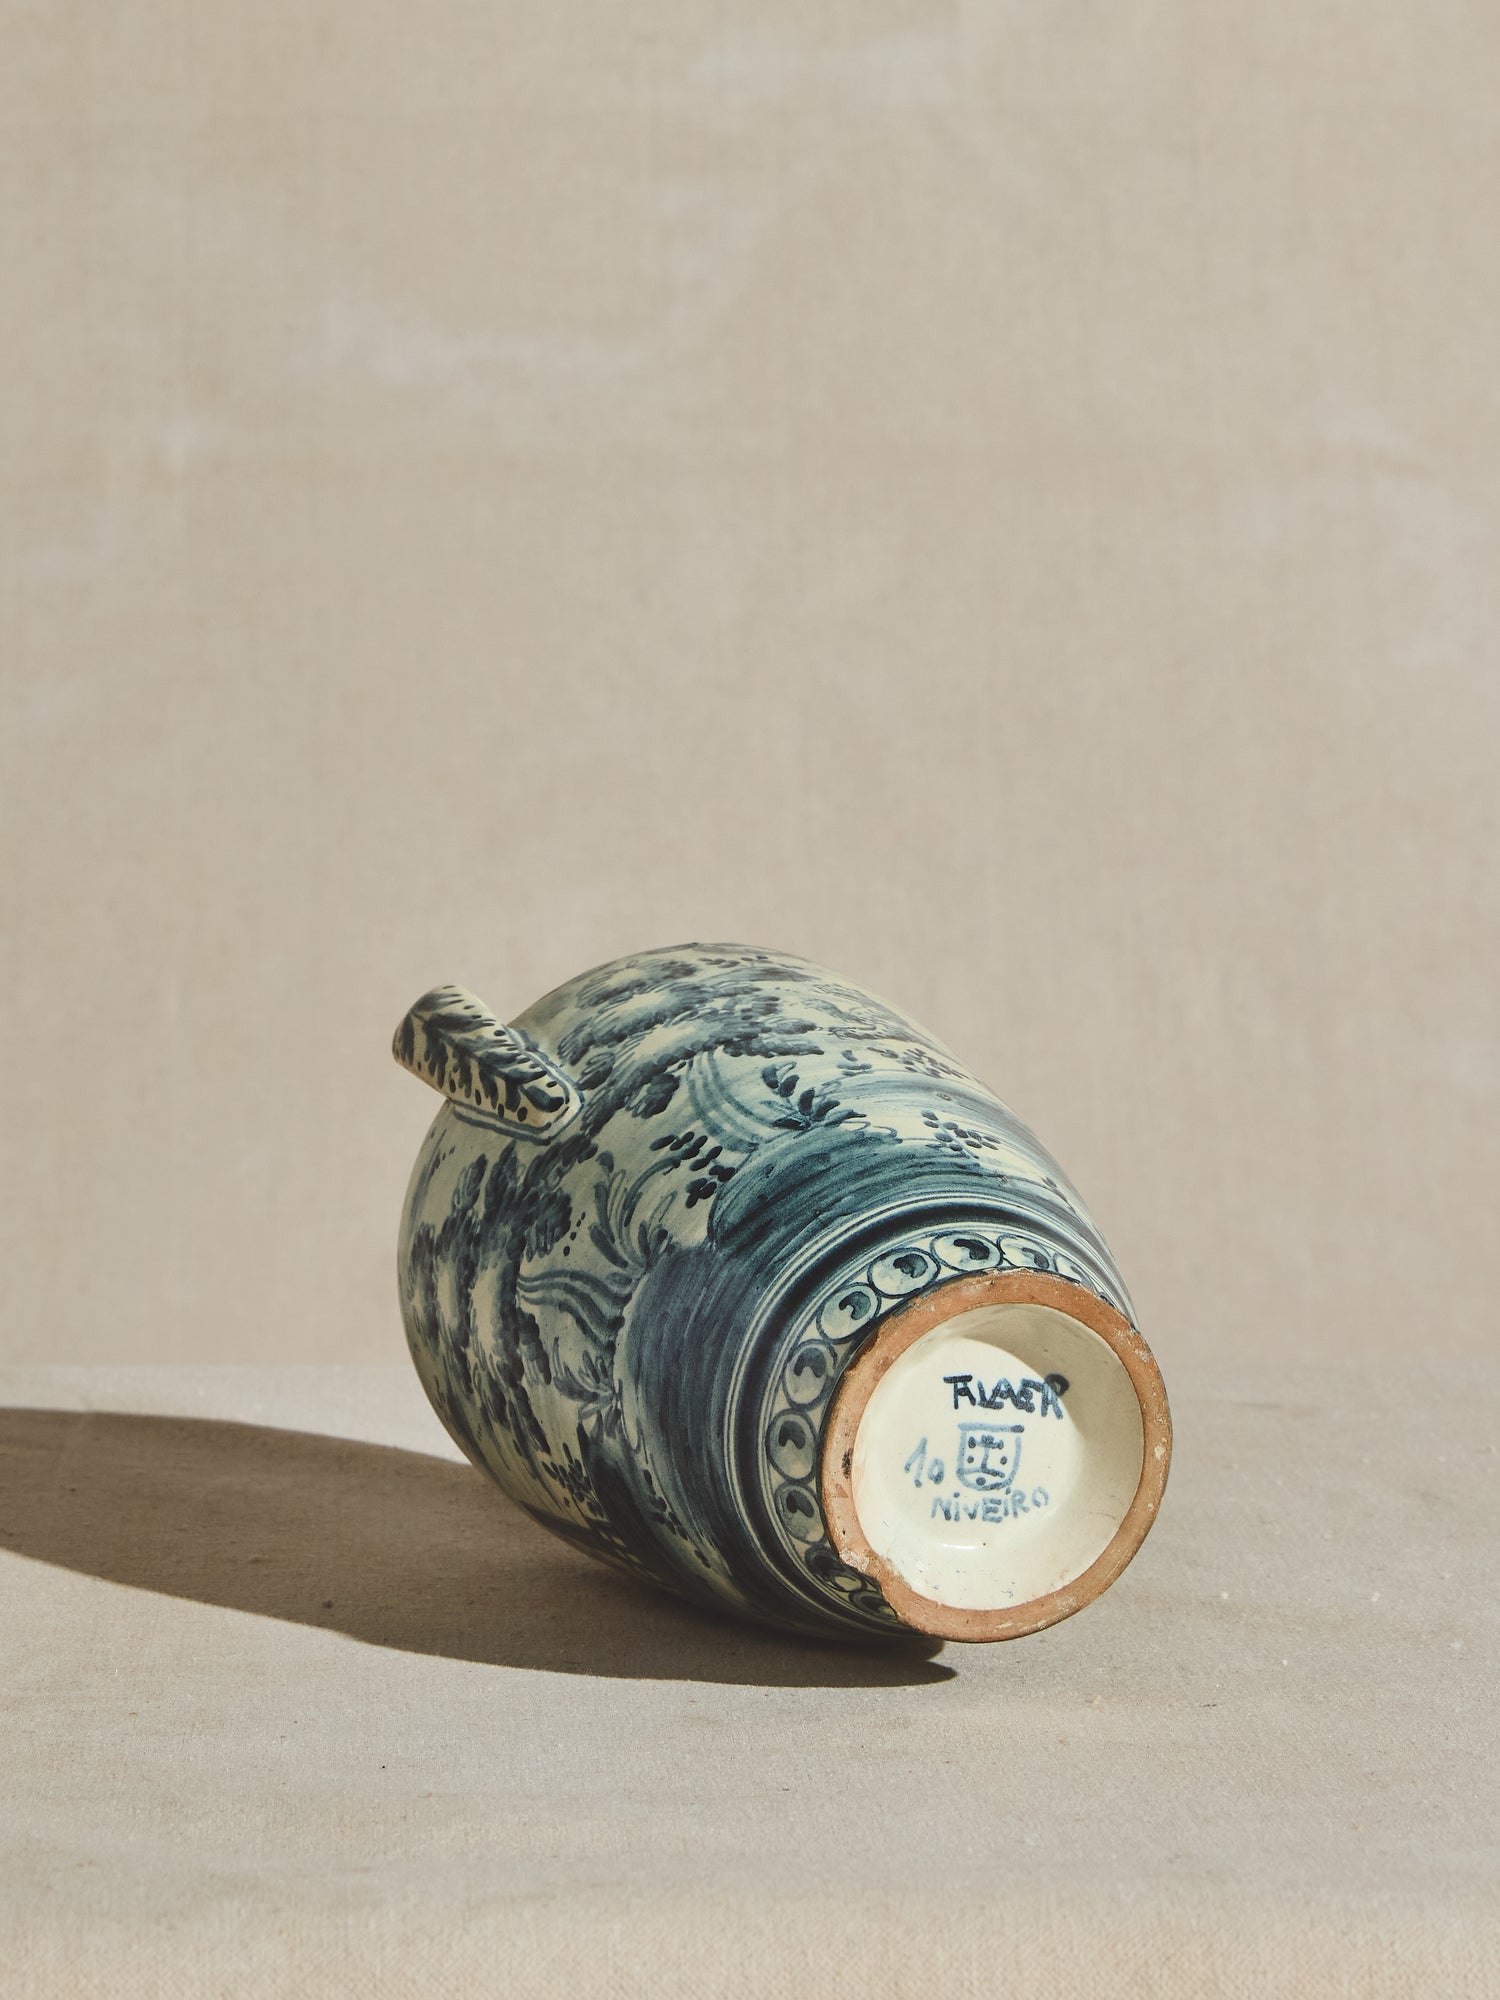 Hand painted clay pottery vase, stamped with the mark of Alaer Niveiro.